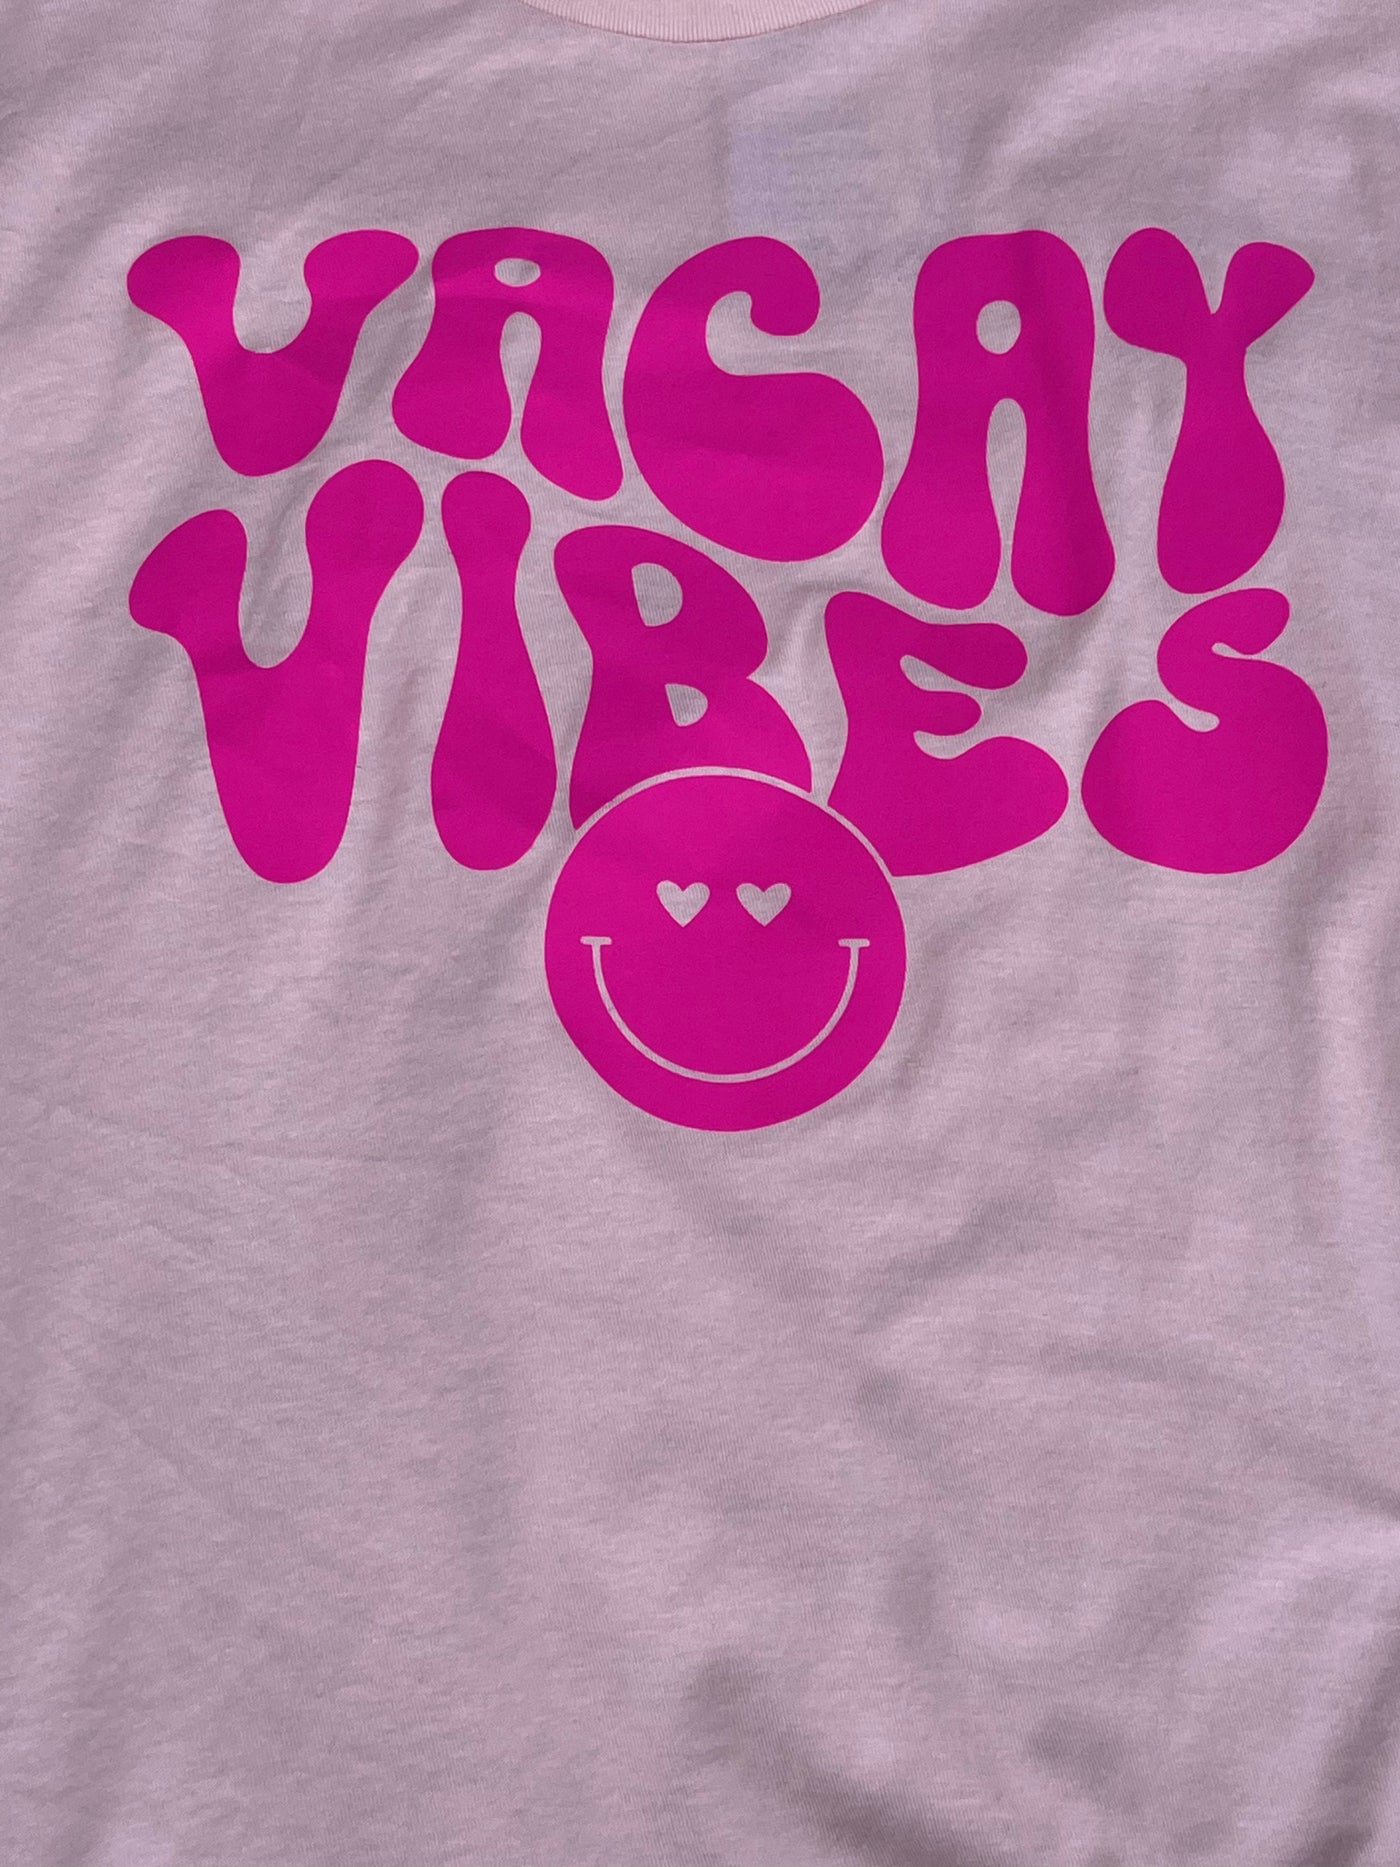 Vacay Vibes T-Shirt in Pink